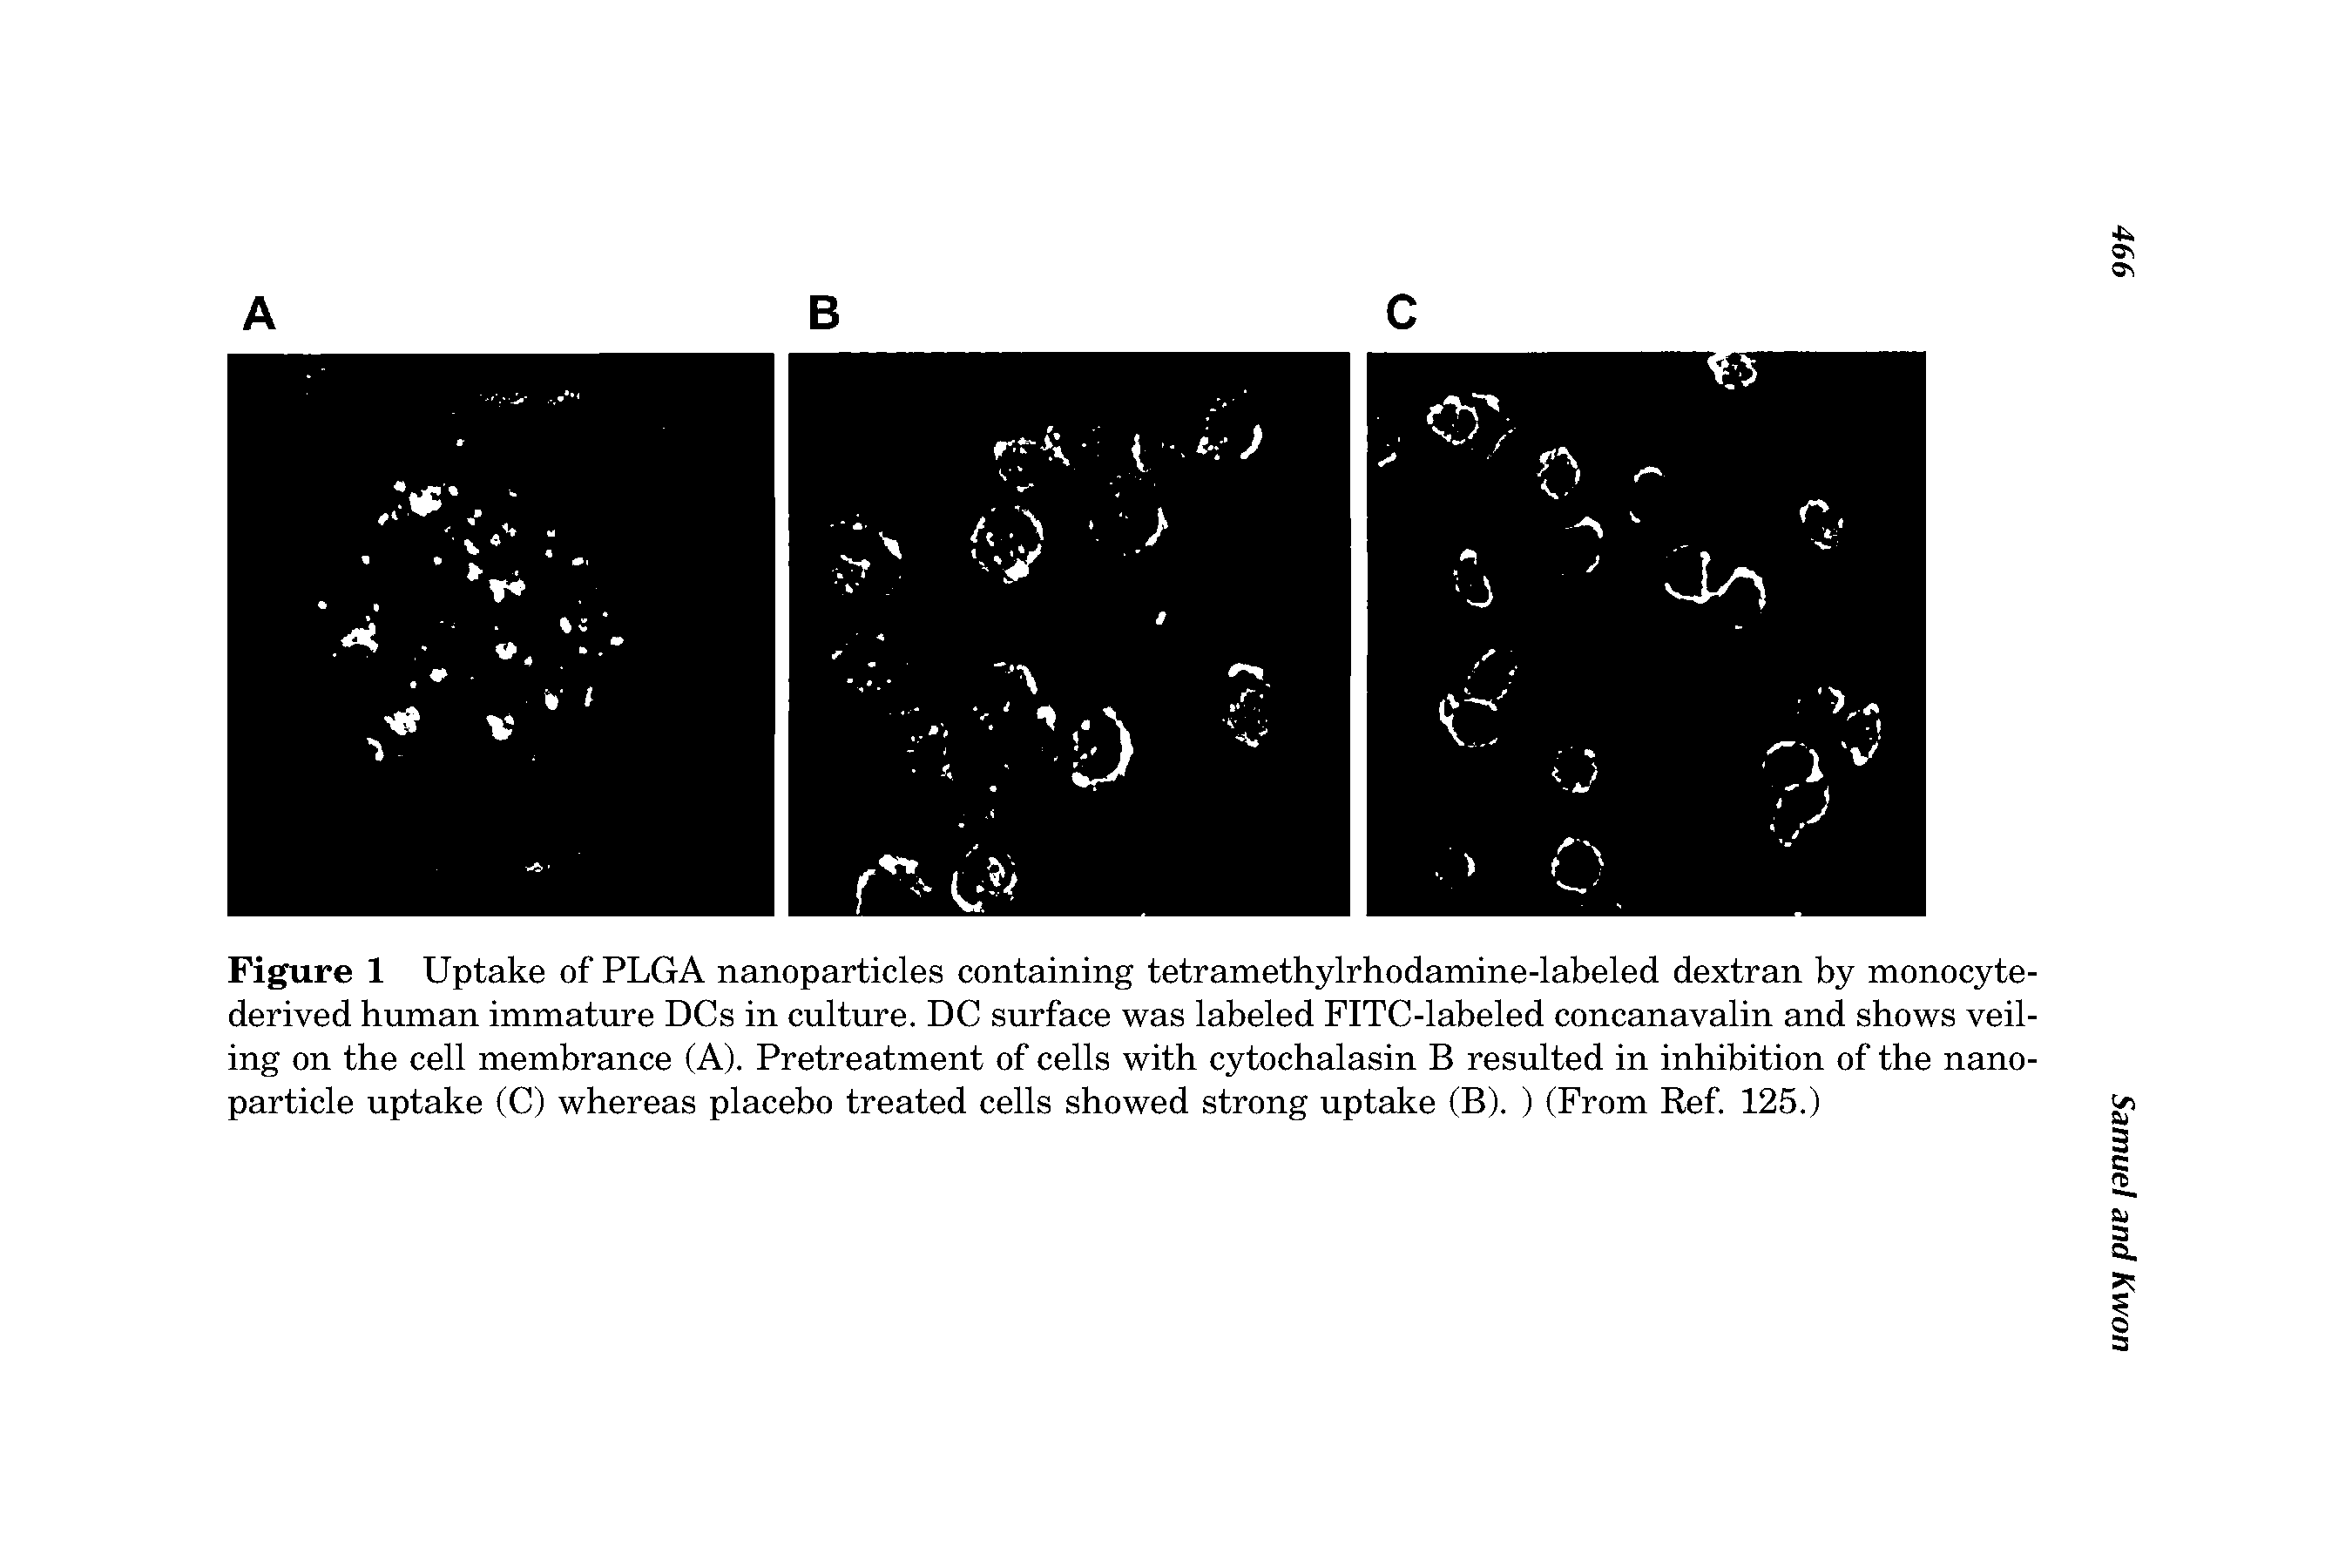 Figure 1 Uptake of PLGA nanoparticles containing tetramethylrhodamine-labeled dextran by monocyte-derived human immature DCs in culture. DC surface was labeled FITC-labeled concanavalin and shows veiling on the cell membrance (A). Pretreatment of cells with cytochalasin B resulted in inhibition of the nanoparticle uptake (C) whereas placebo treated cells showed strong uptake (B). ) (From Ref 125.)...